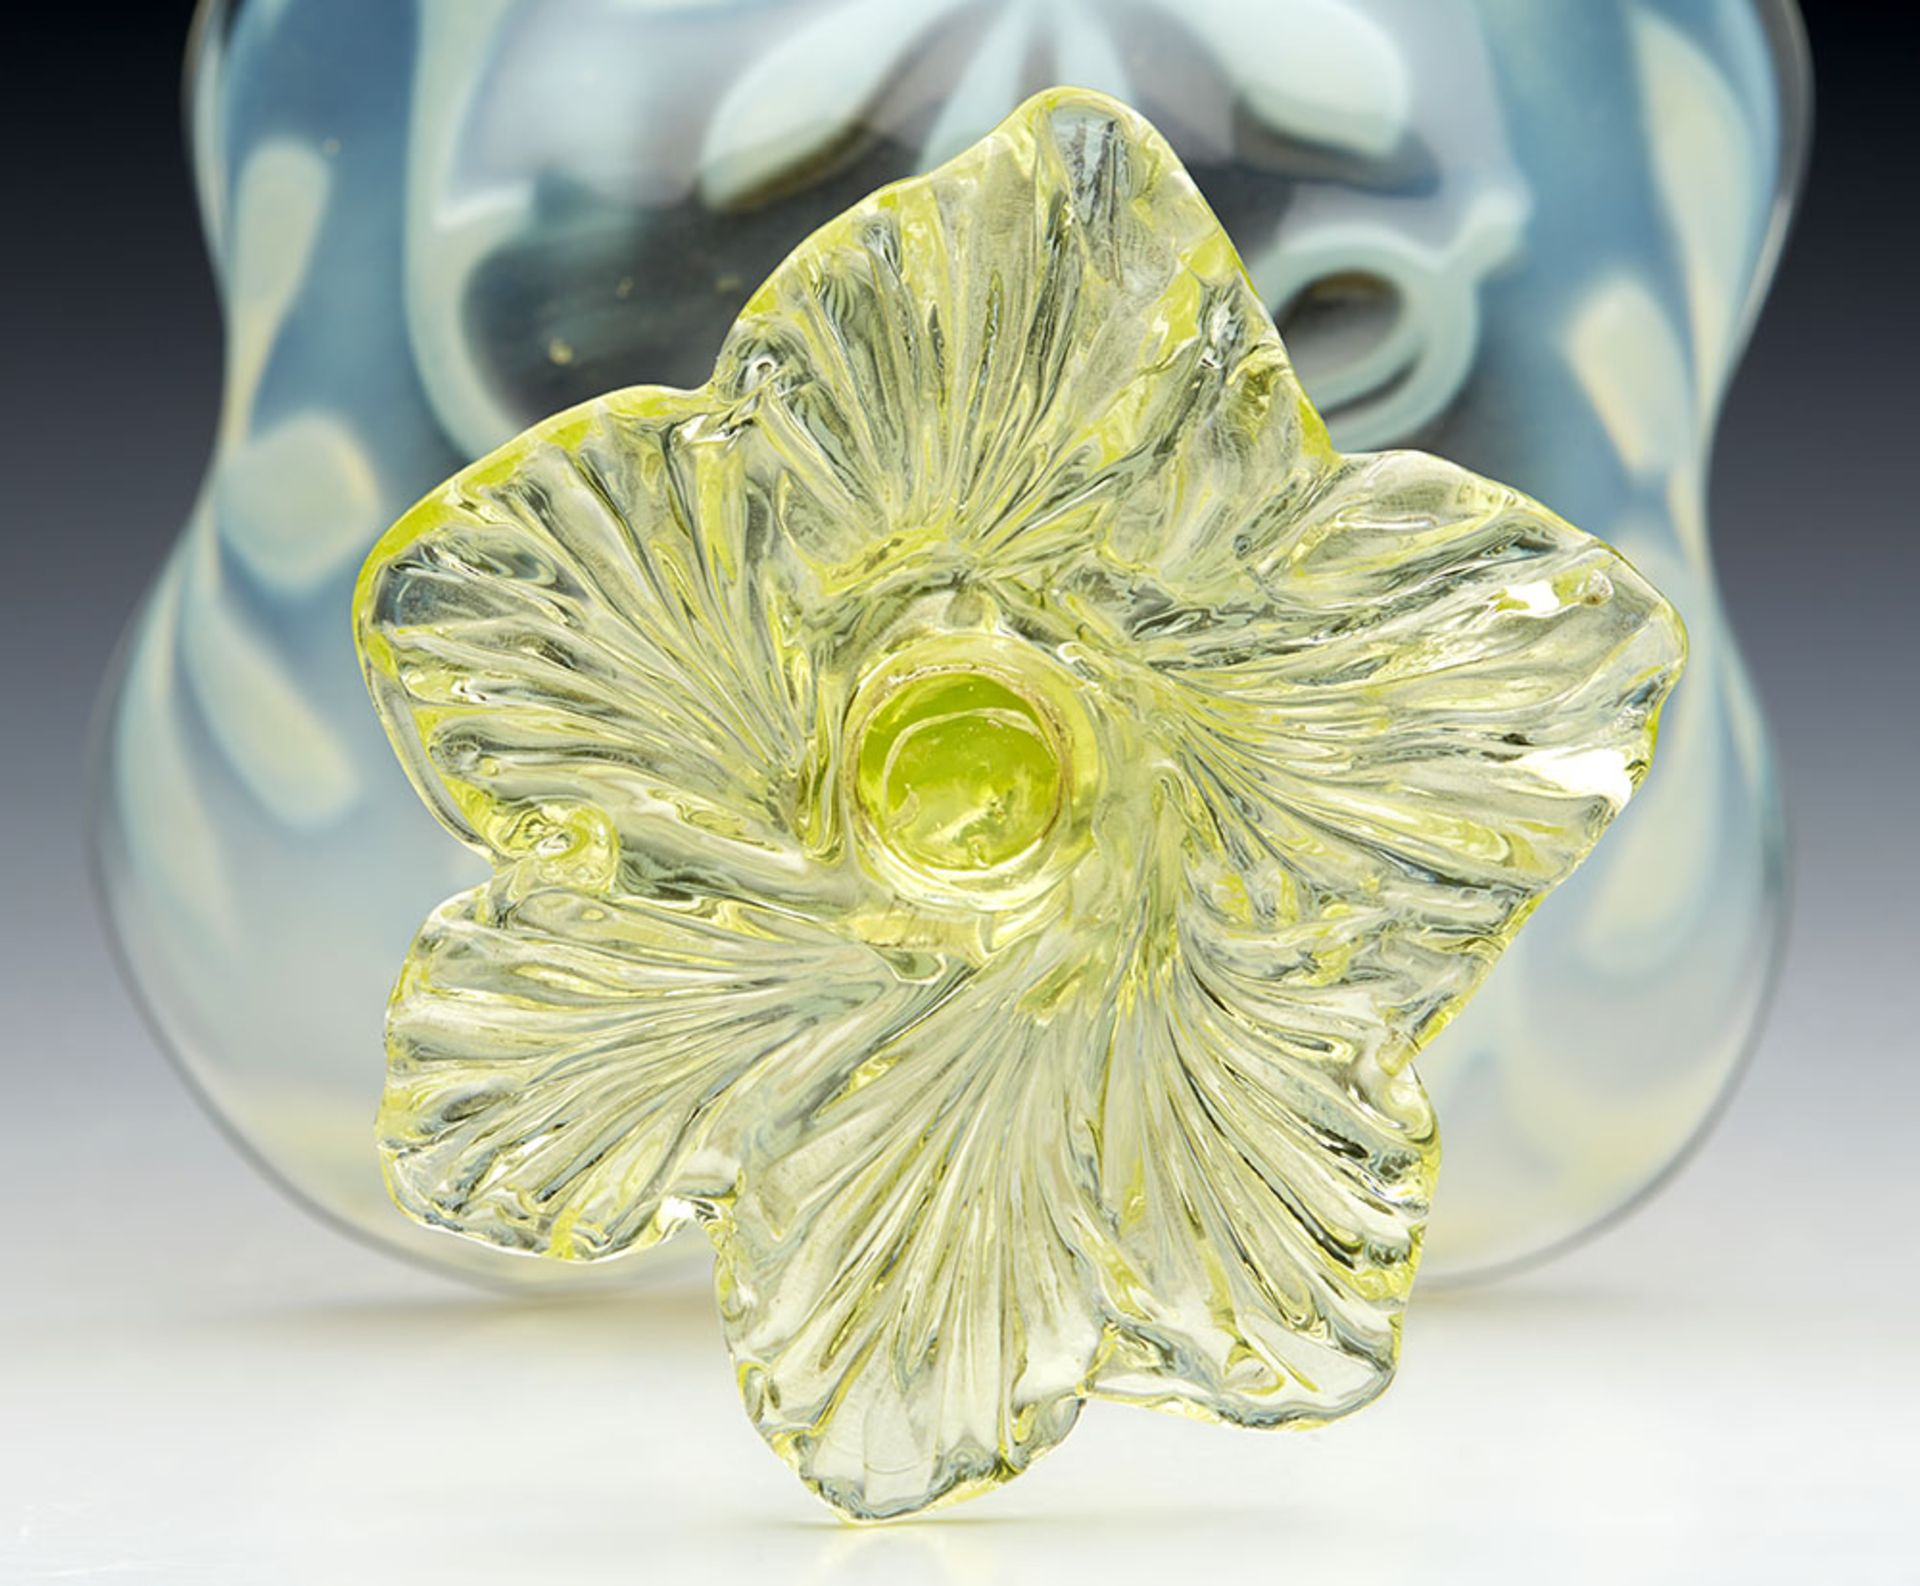 Antique English Yellow Vaseline Glass Stem Dish With Floral Designs C.1890 - Image 6 of 9